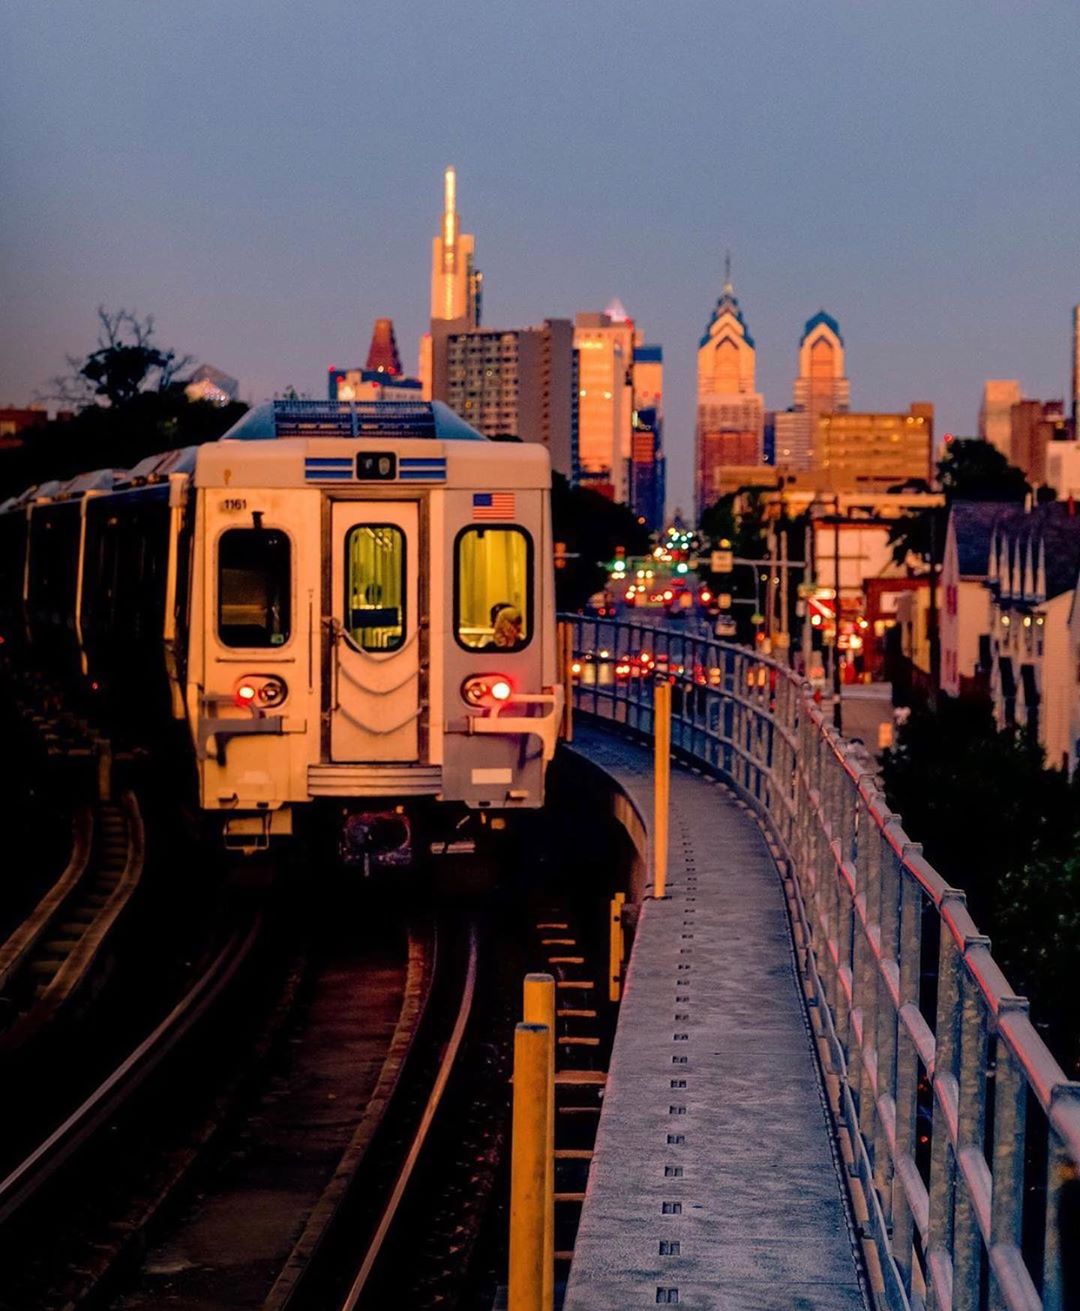 Public train transportation at sunrise. Photo by Instagram user @thefrancoleman